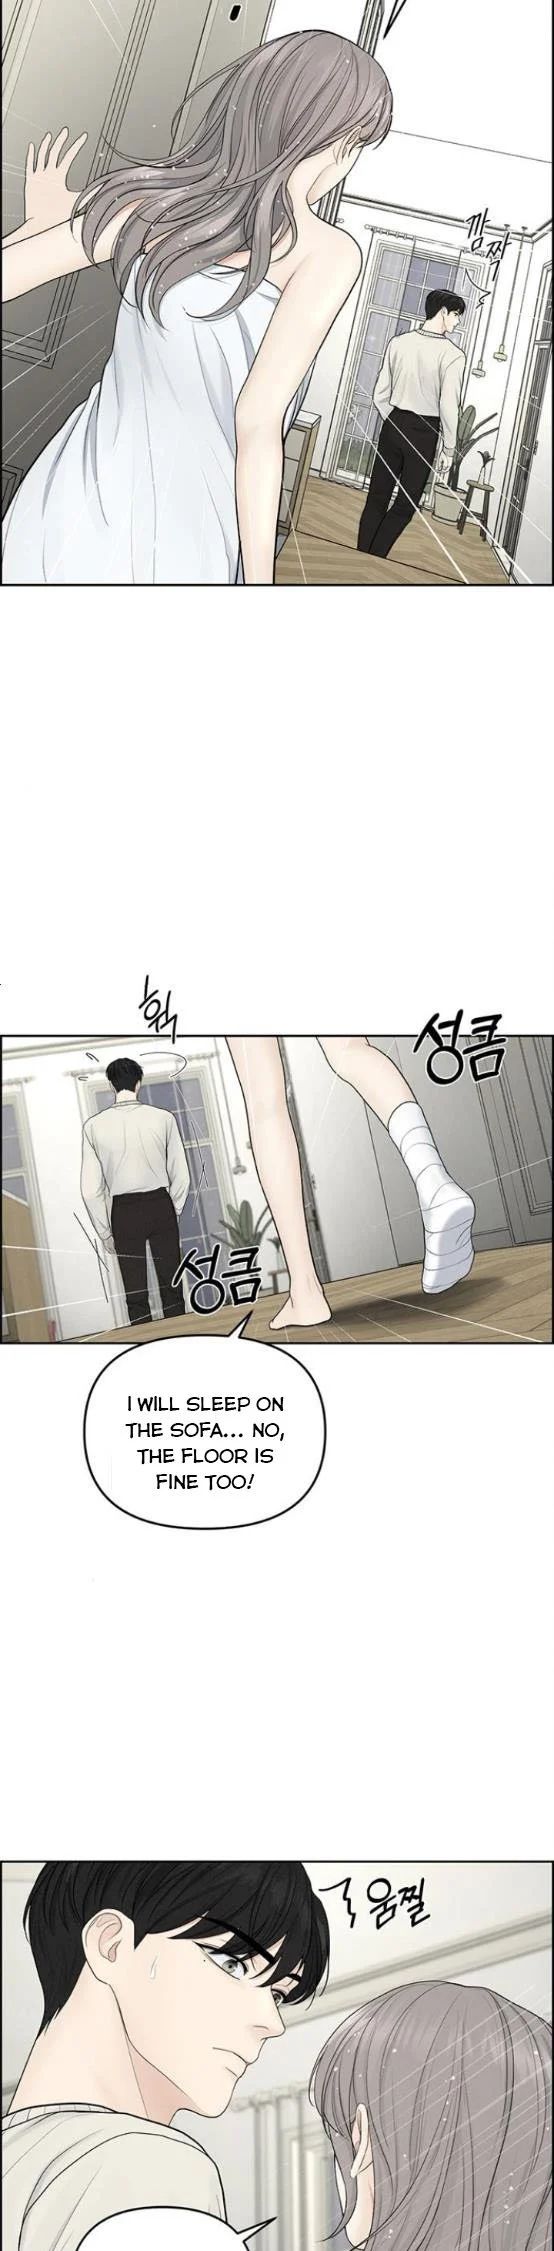 Only Hope - chapter 6.5 - #6